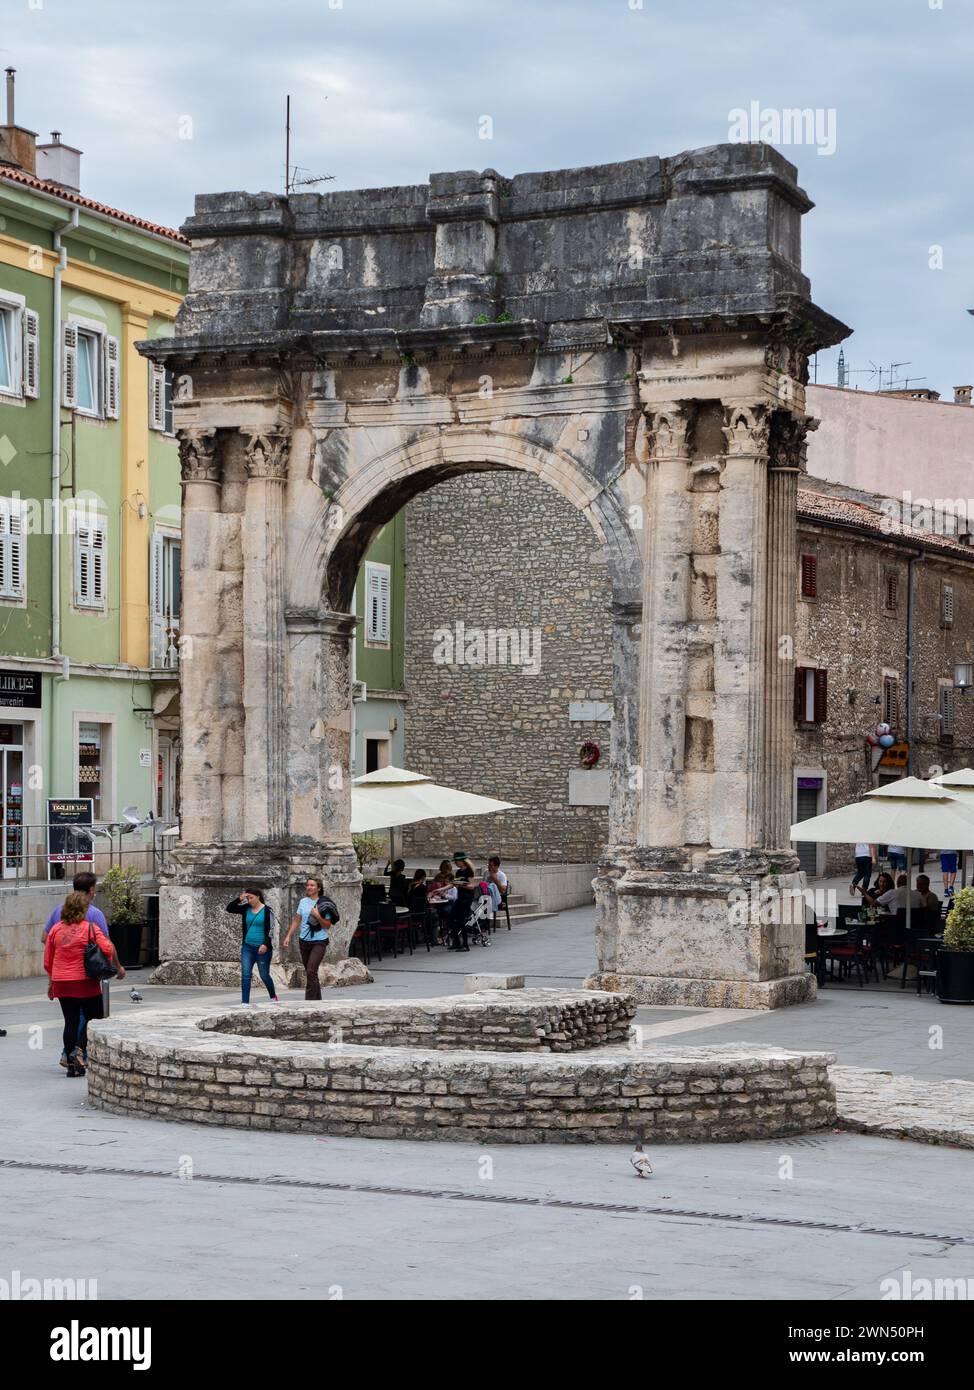 Tourists under the Sergio Arch - Roman triumphal arch of the Sergio family built in 29 BC in memory of members of the Sergio family.  Pula, Pola, Istria, Croatia. Stock Photo